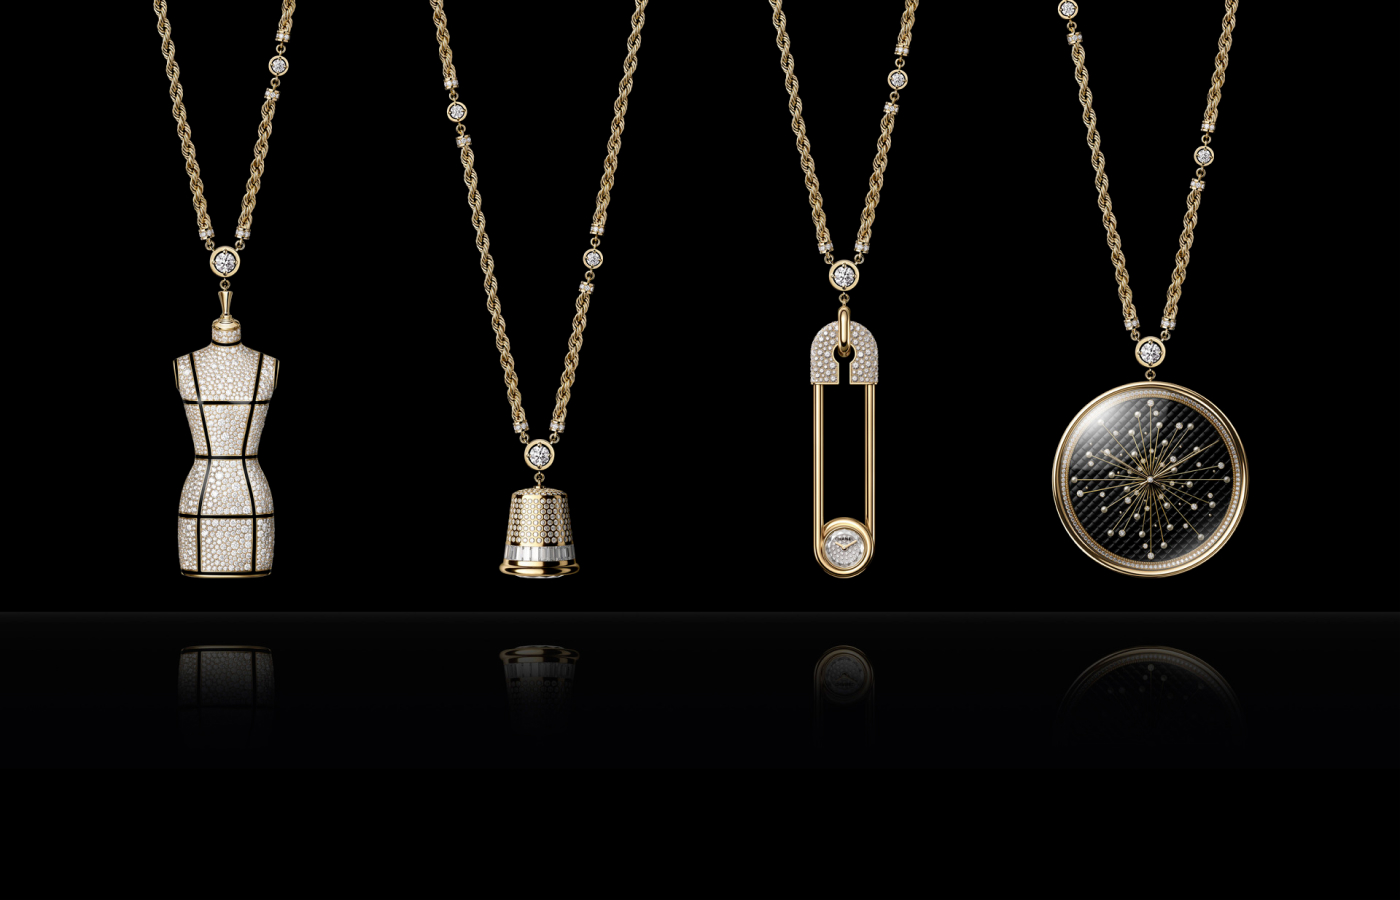 Chanel Couture O'Clock timpiece capsule collection including the Safety Pin Long Necklace Couture watch in gold snow-set with 286 brilliant-cut diamonds 